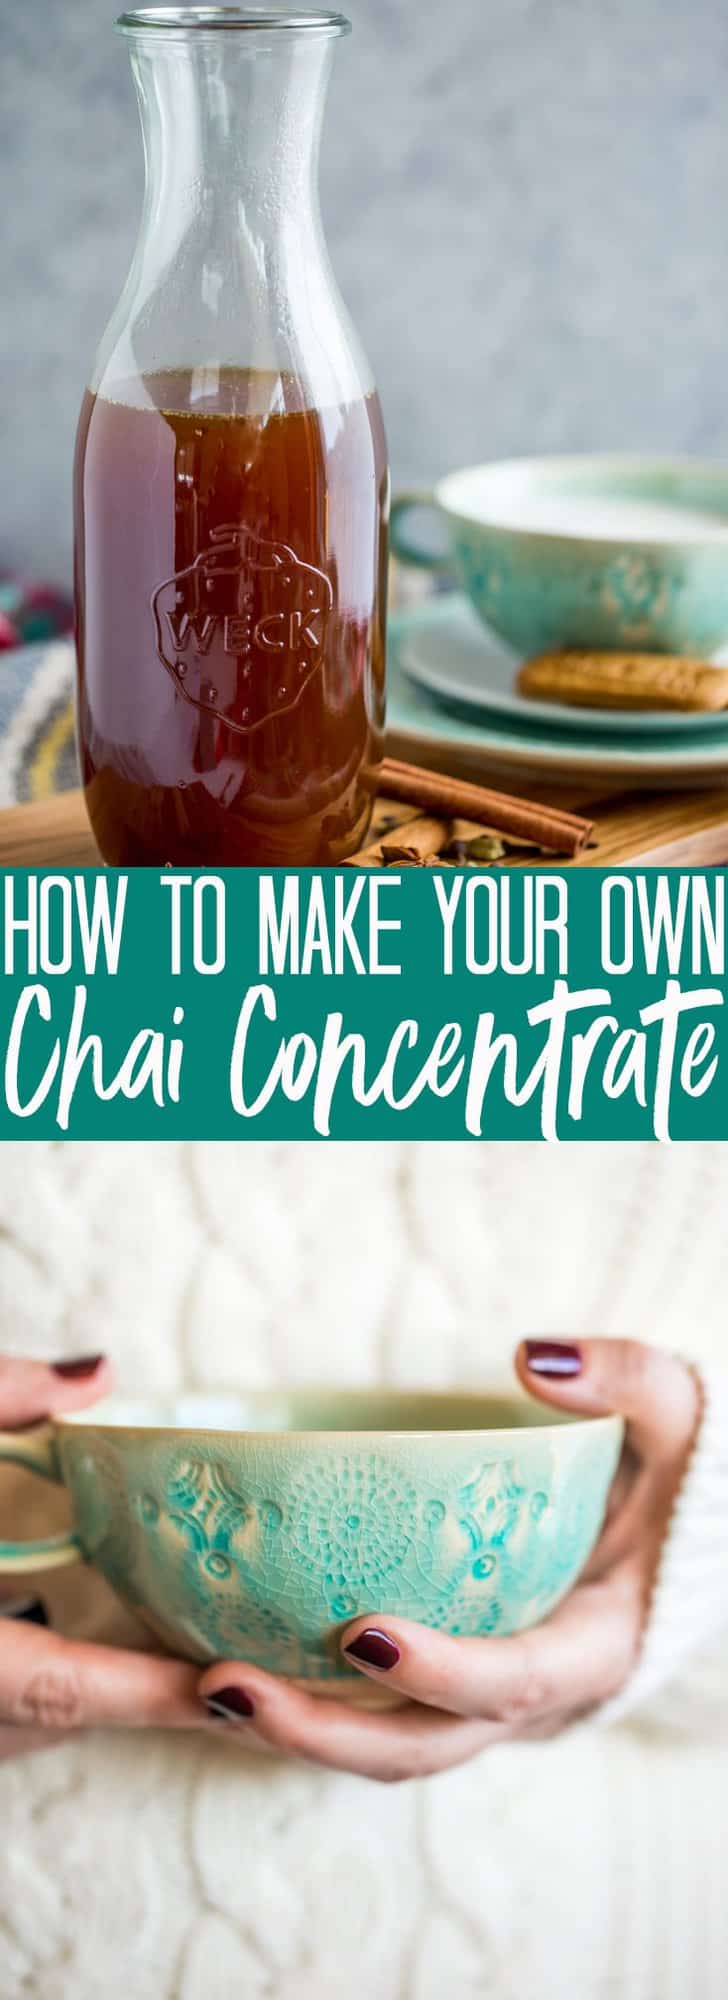 How to make Chai Concentrate - Fox and